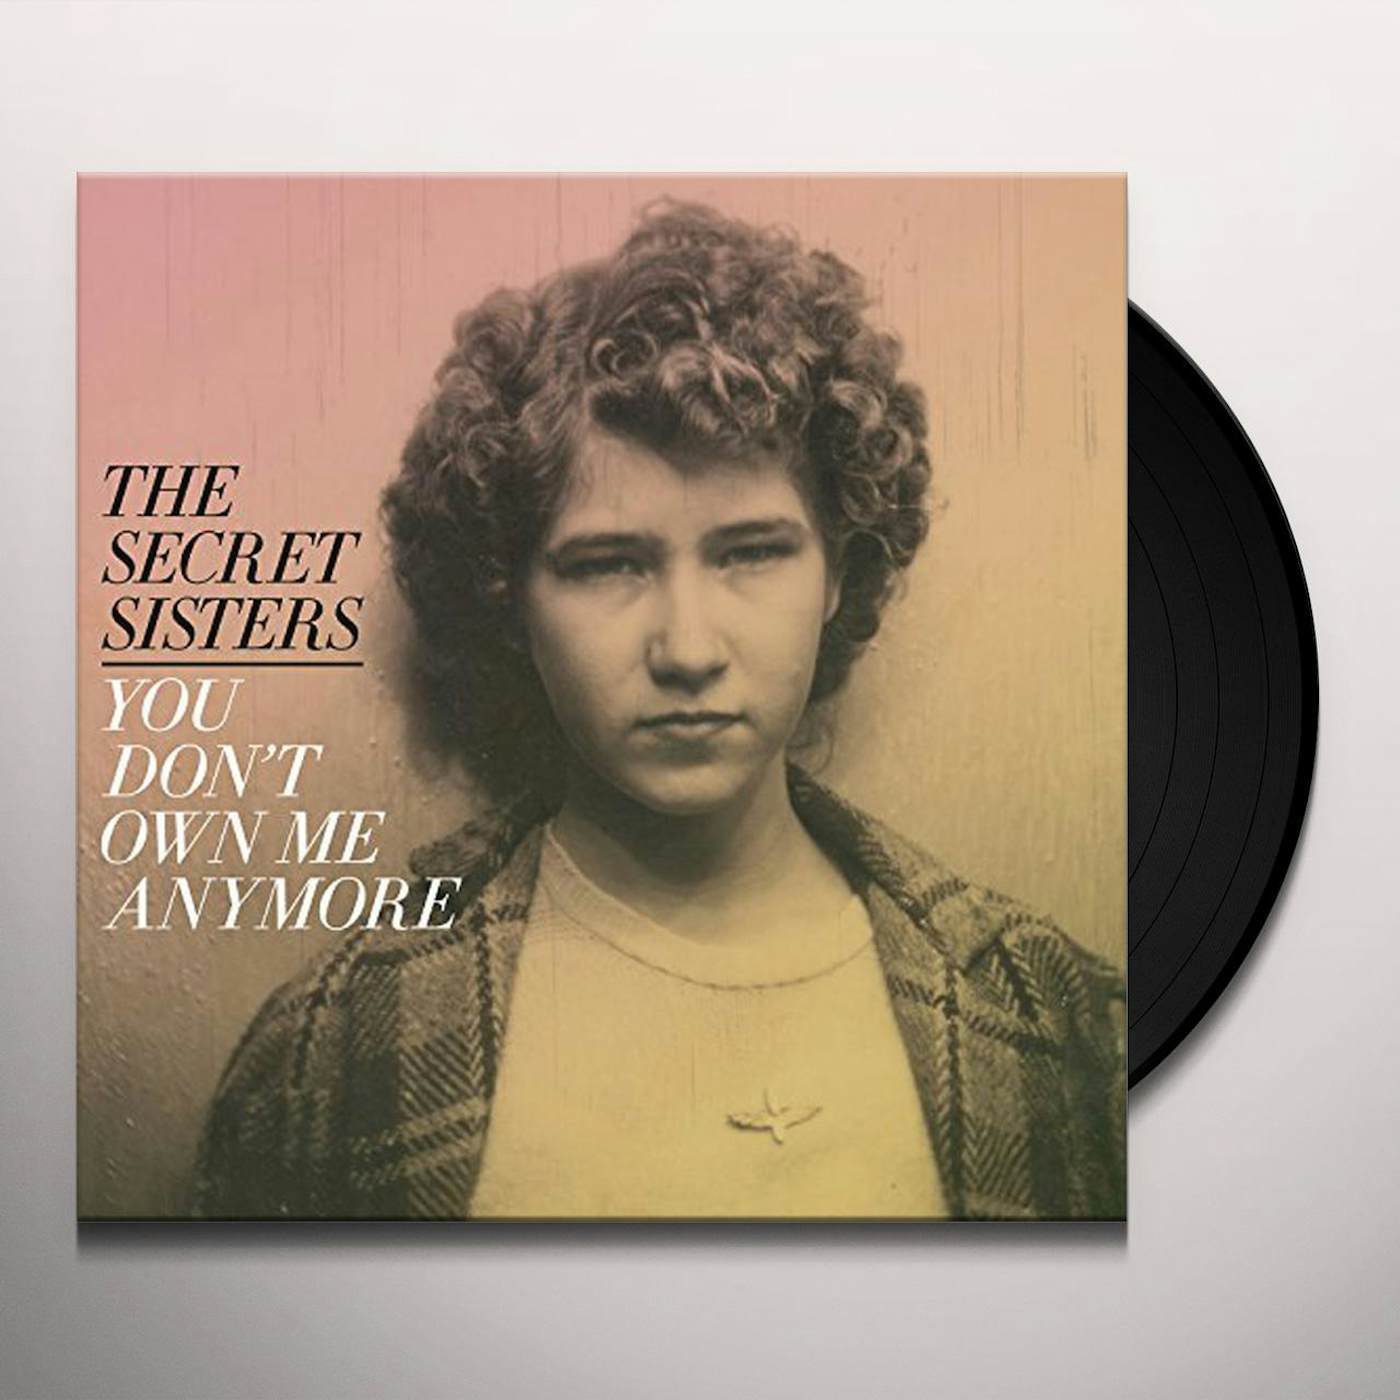 The Secret Sisters You Don't Own Me Anymore Vinyl Record